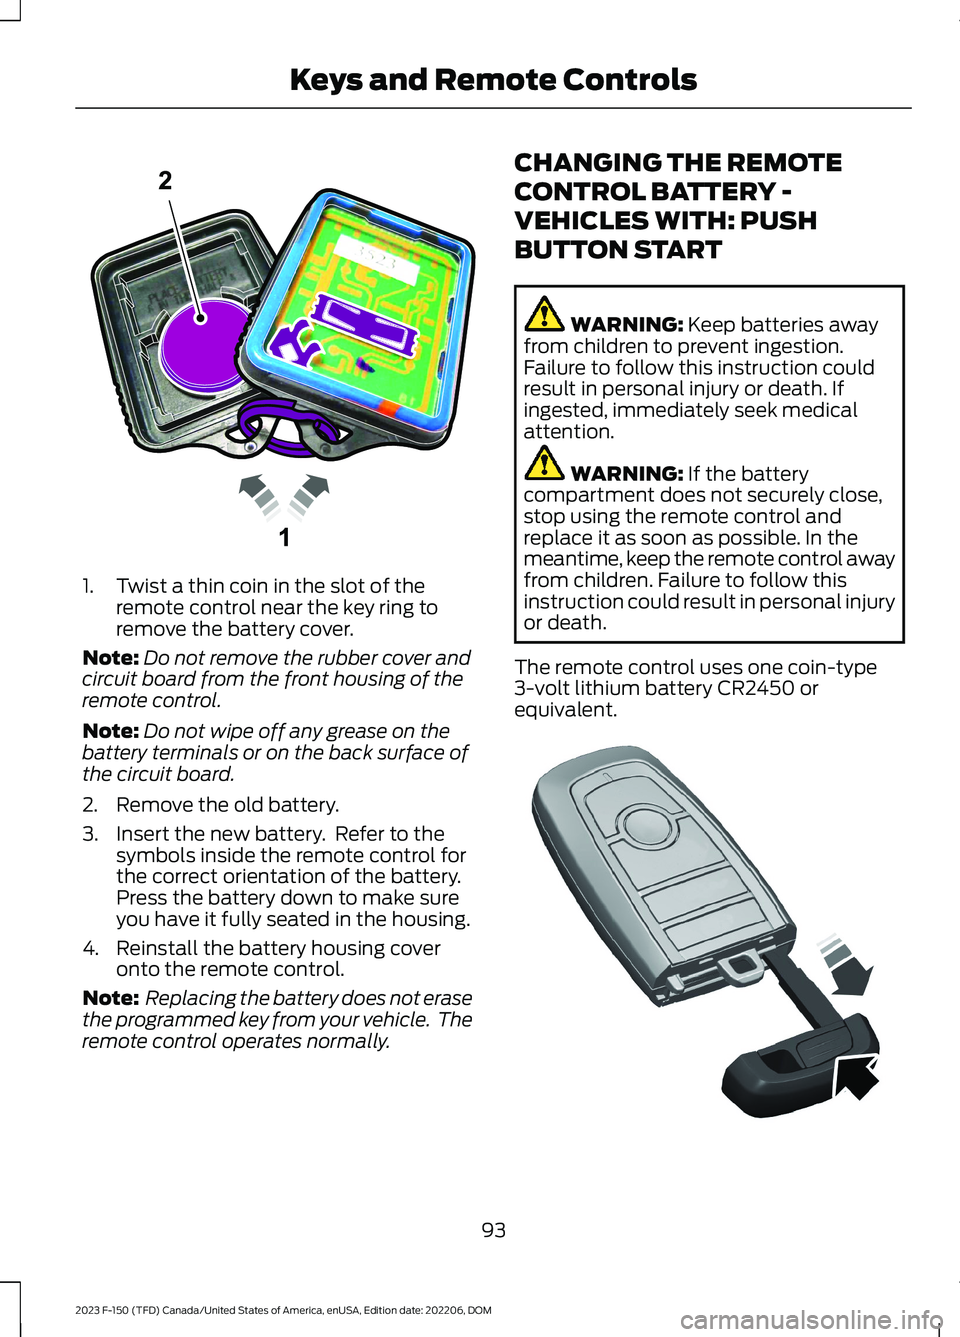 FORD F150 2023  Owners Manual 1.Twist a thin coin in the slot of theremote control near the key ring toremove the battery cover.
Note:Do not remove the rubber cover andcircuit board from the front housing of theremote control.
Not